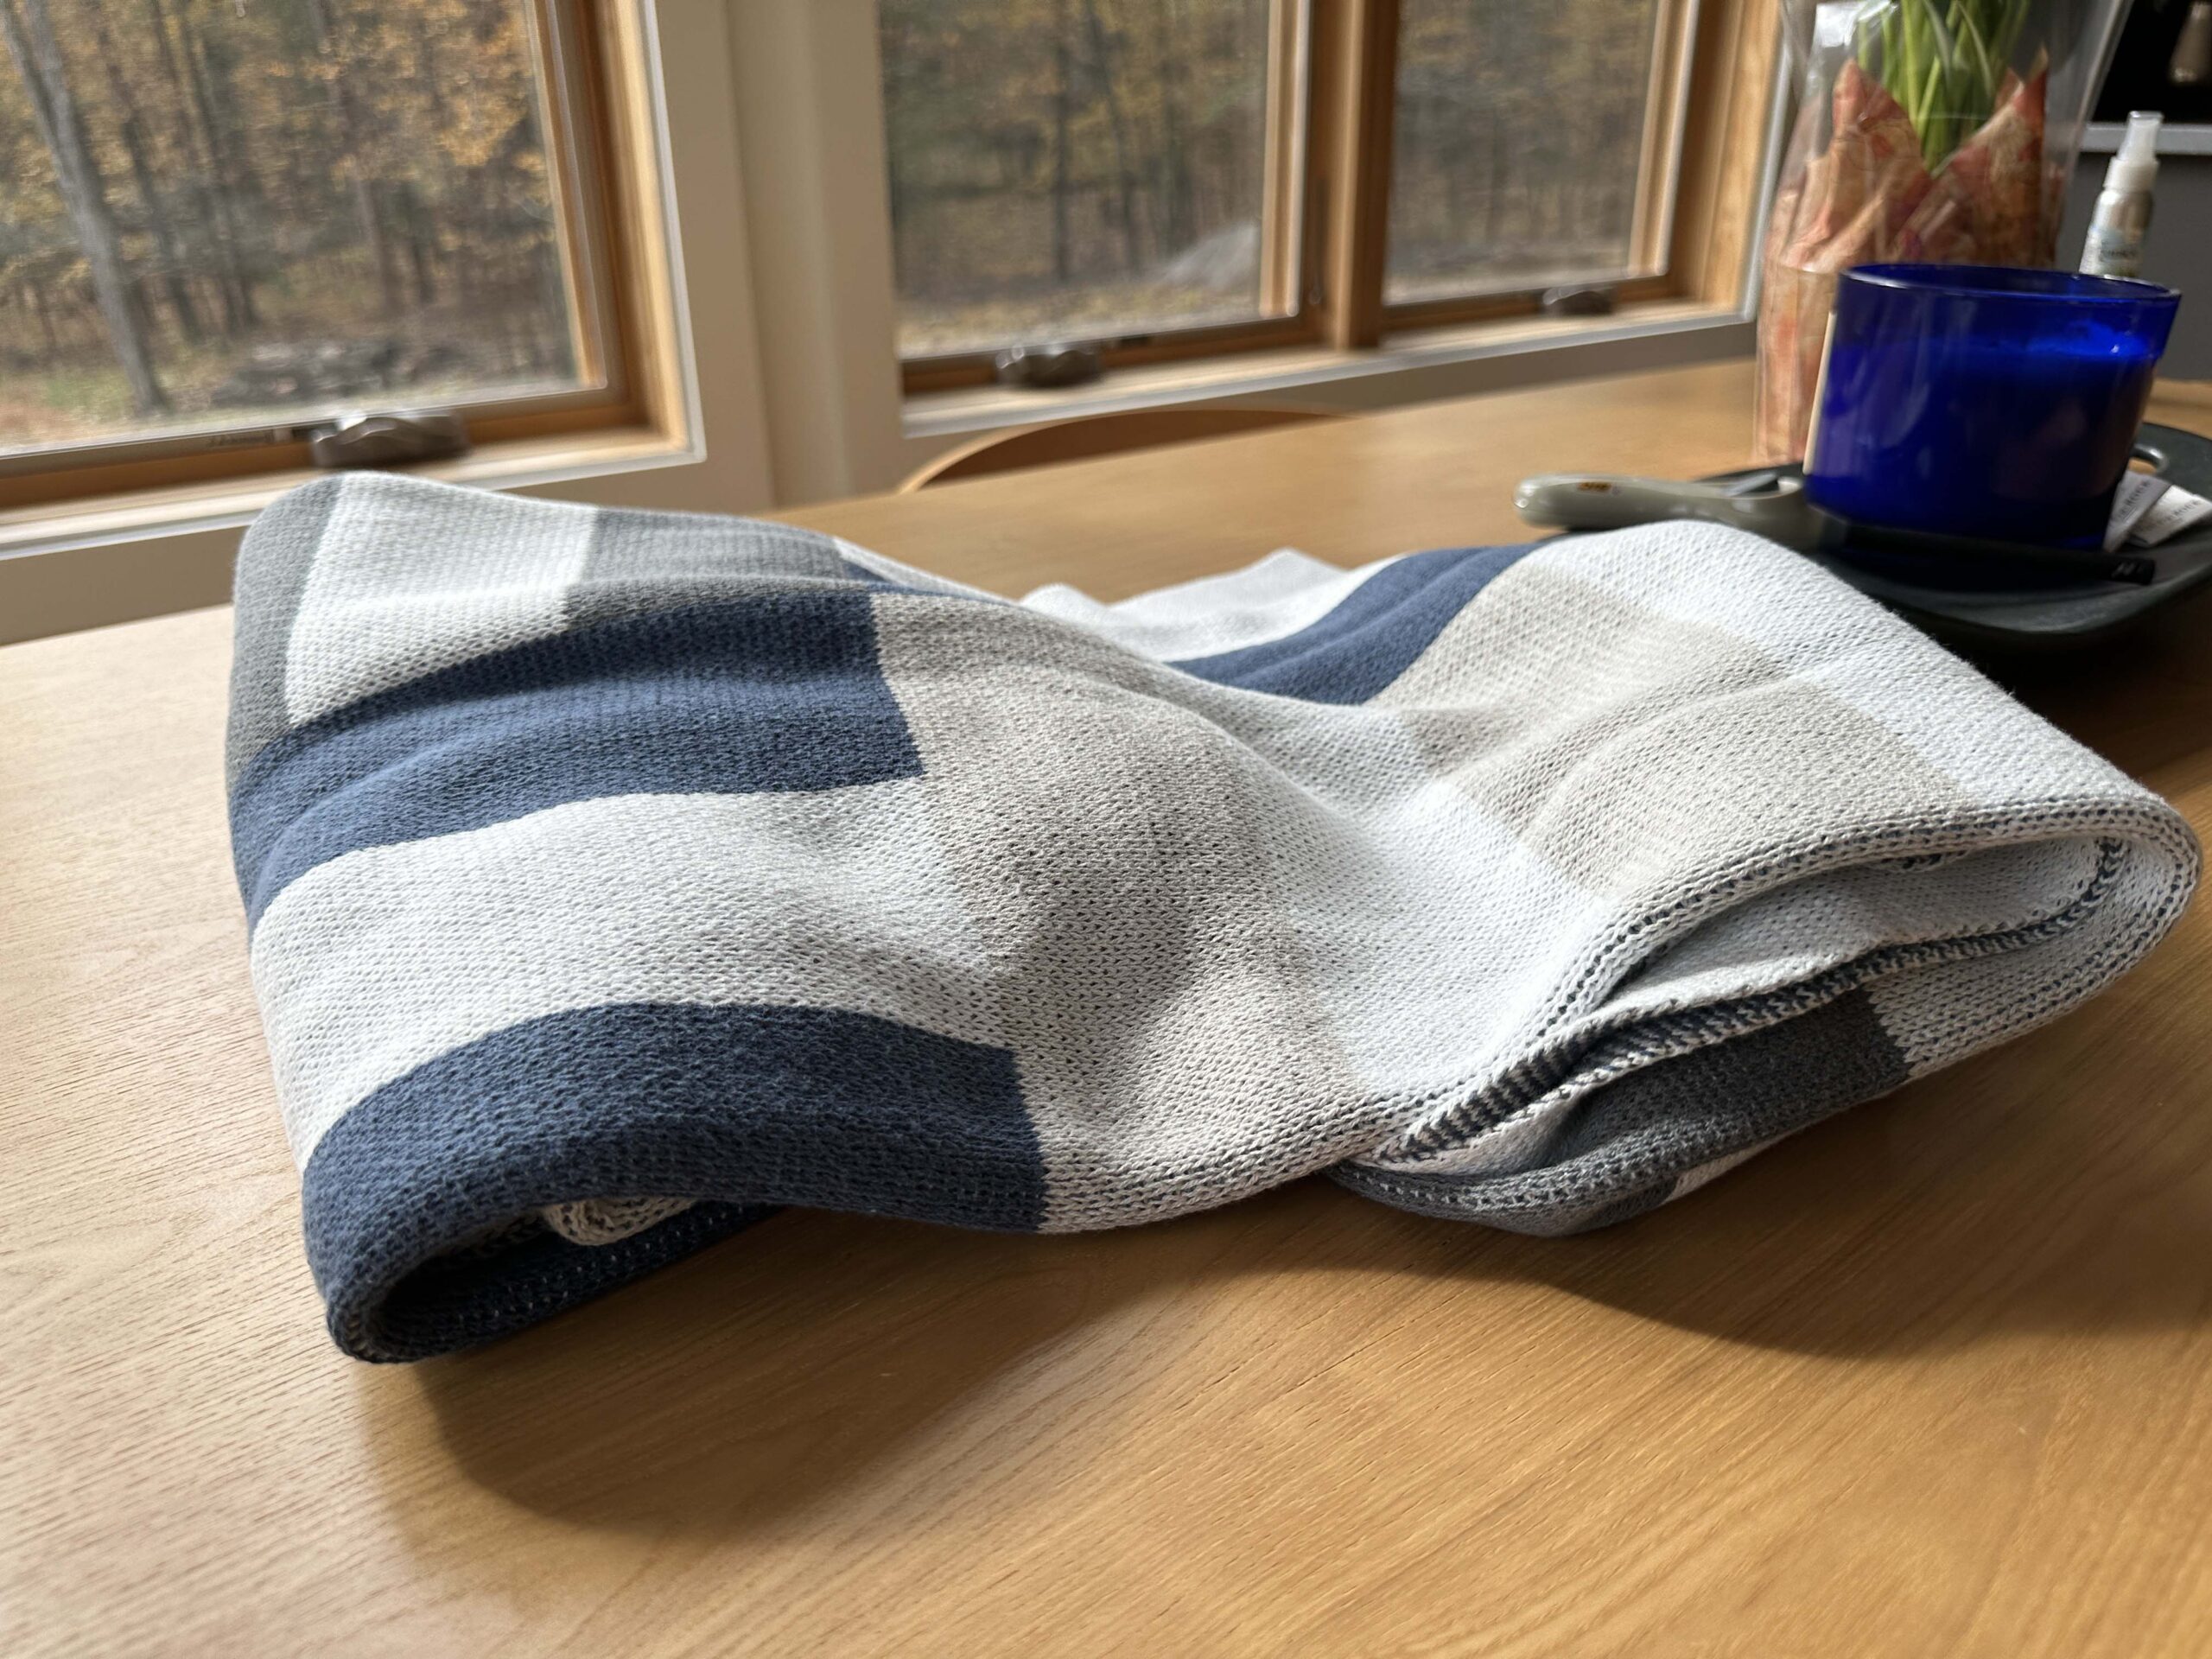 Double Stitch by Bedsure Throw Blanket on a wooden table